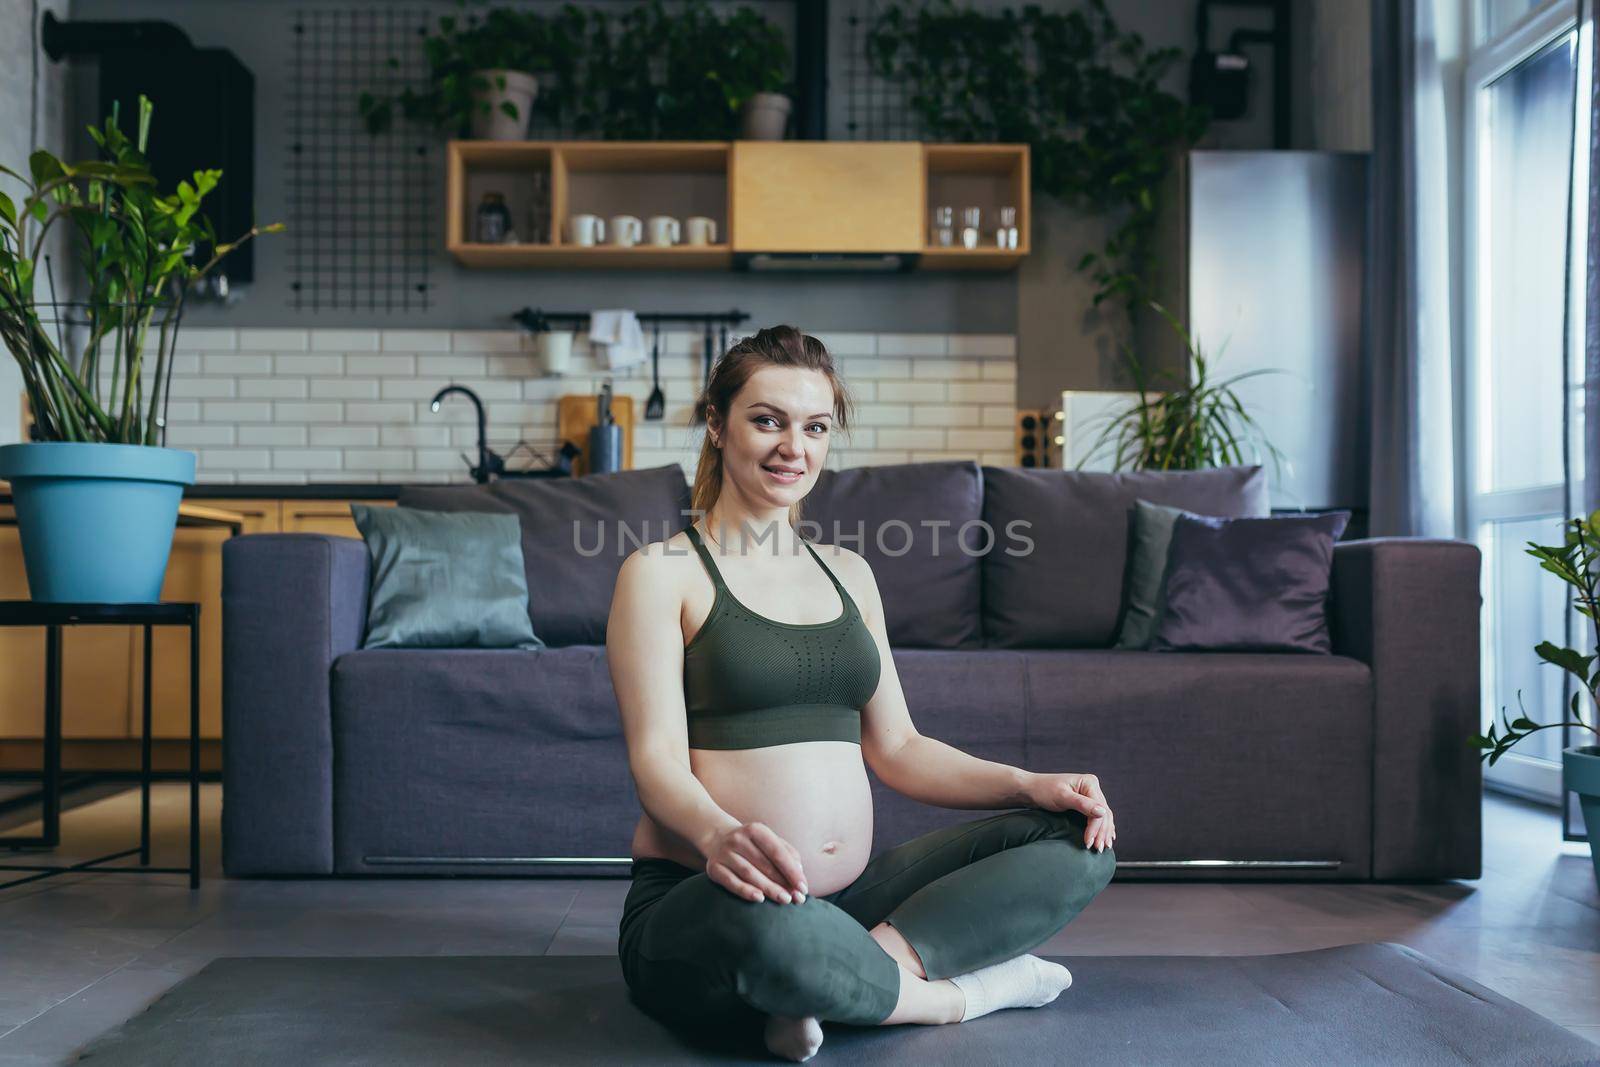 A pregnant woman meditates and practices yoga in a lotus position at home